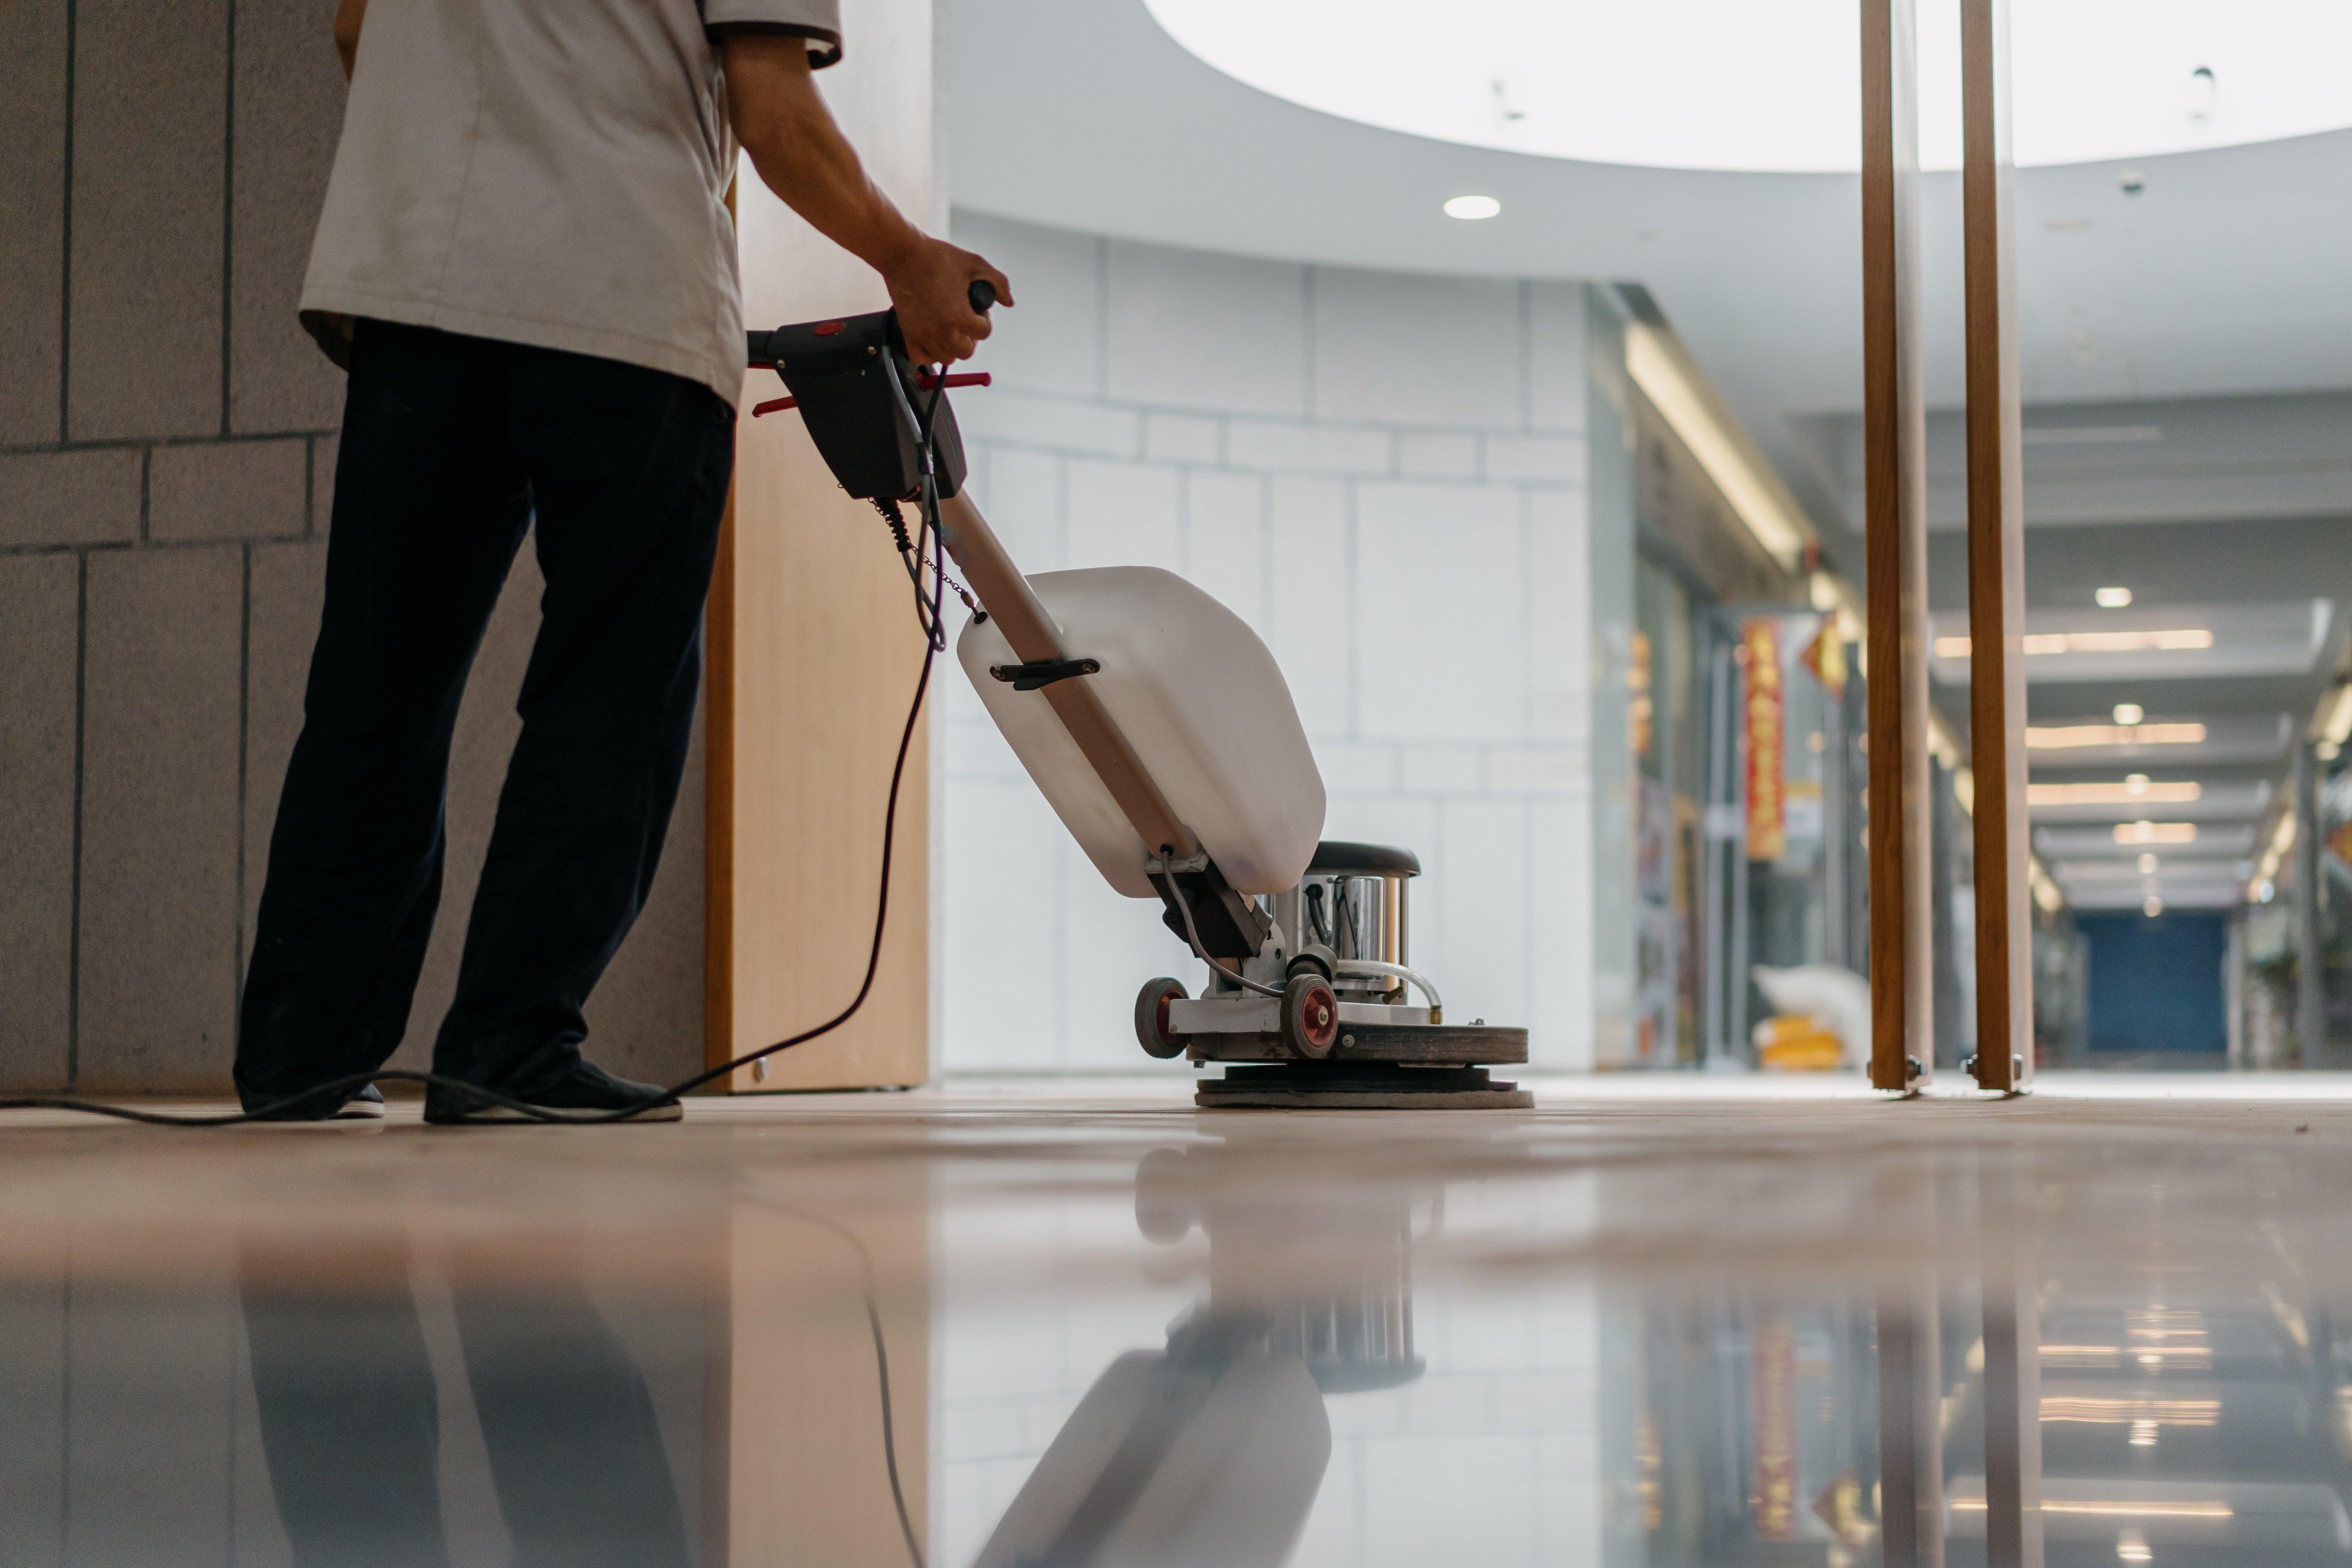 A facilities worker cleans the floor in a commercial building lobby with a floor buffer.